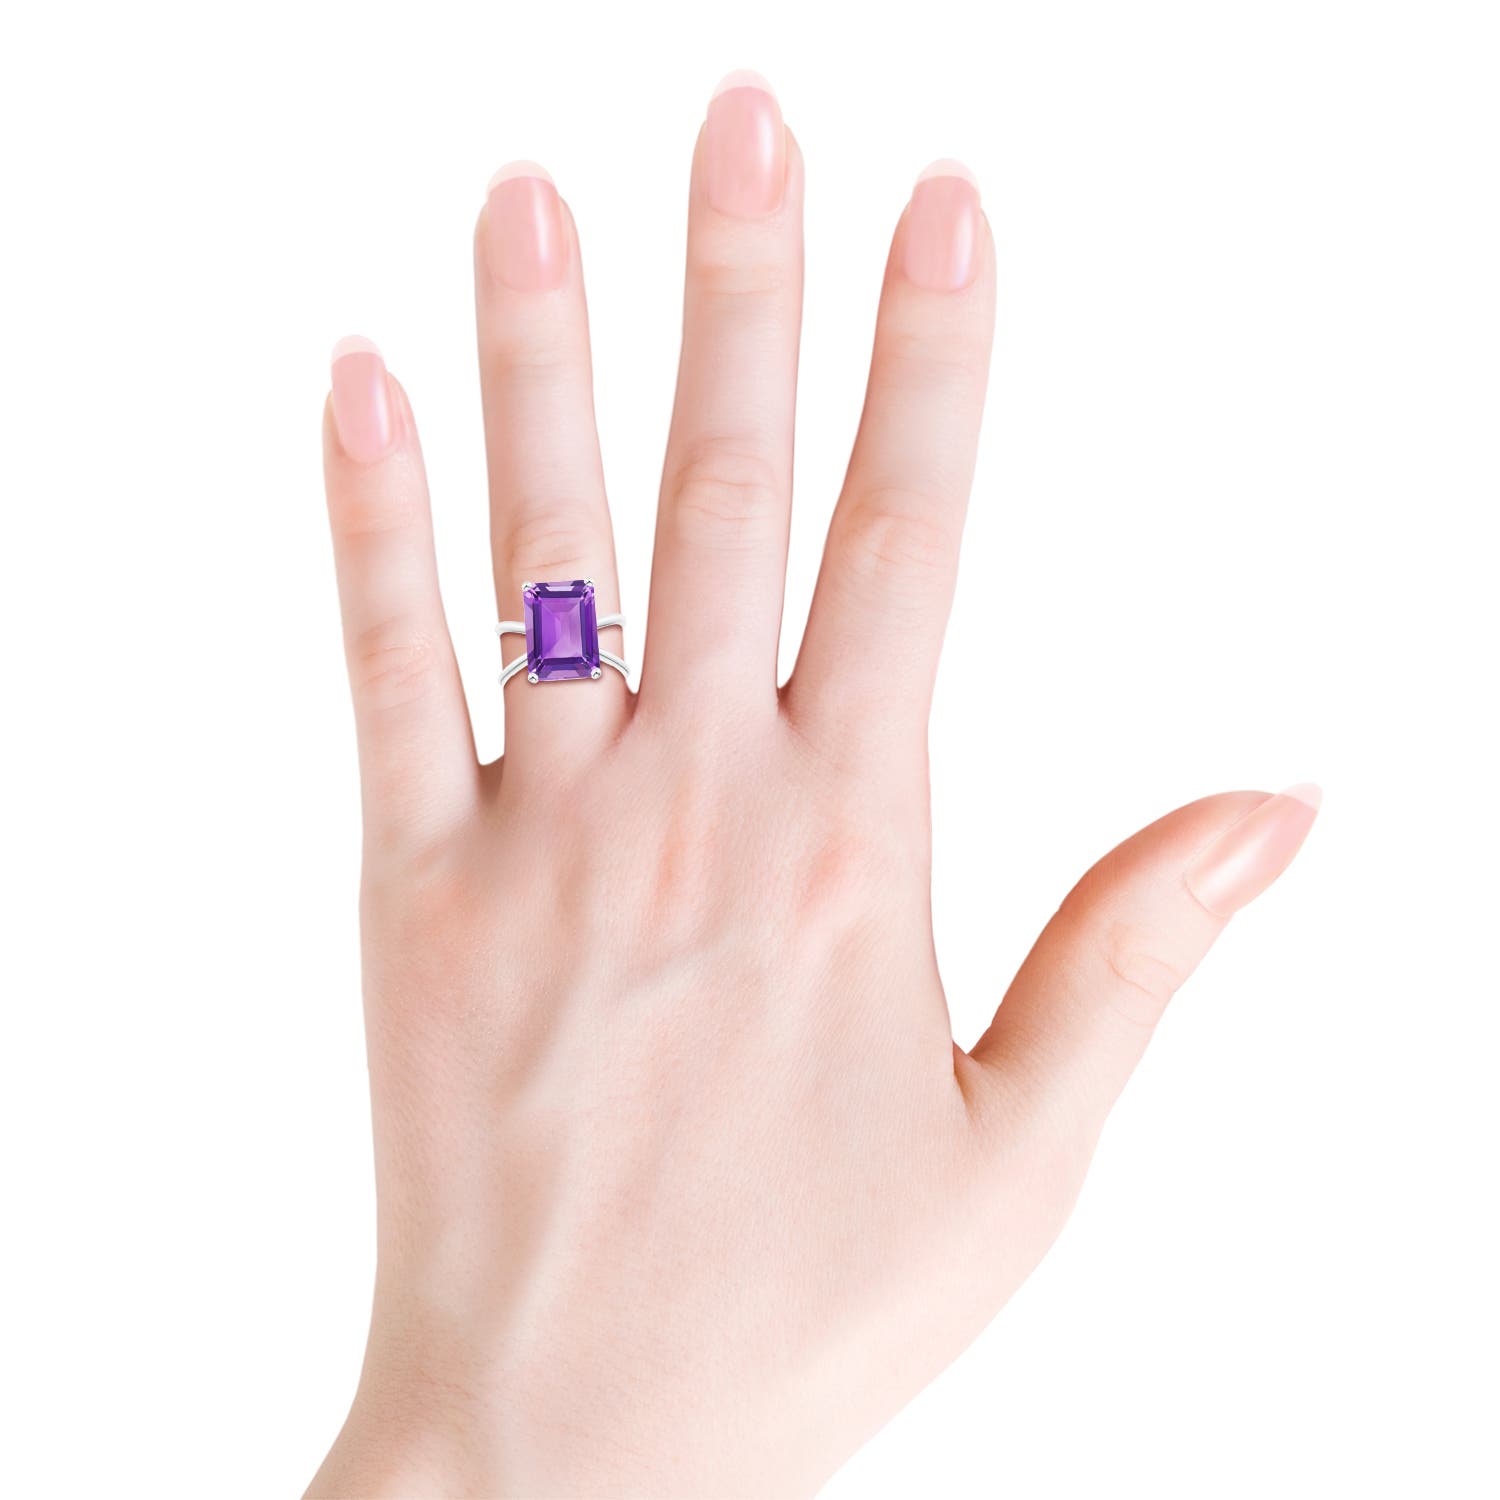 AA - Amethyst / 6.5 CT / 14 KT White Gold